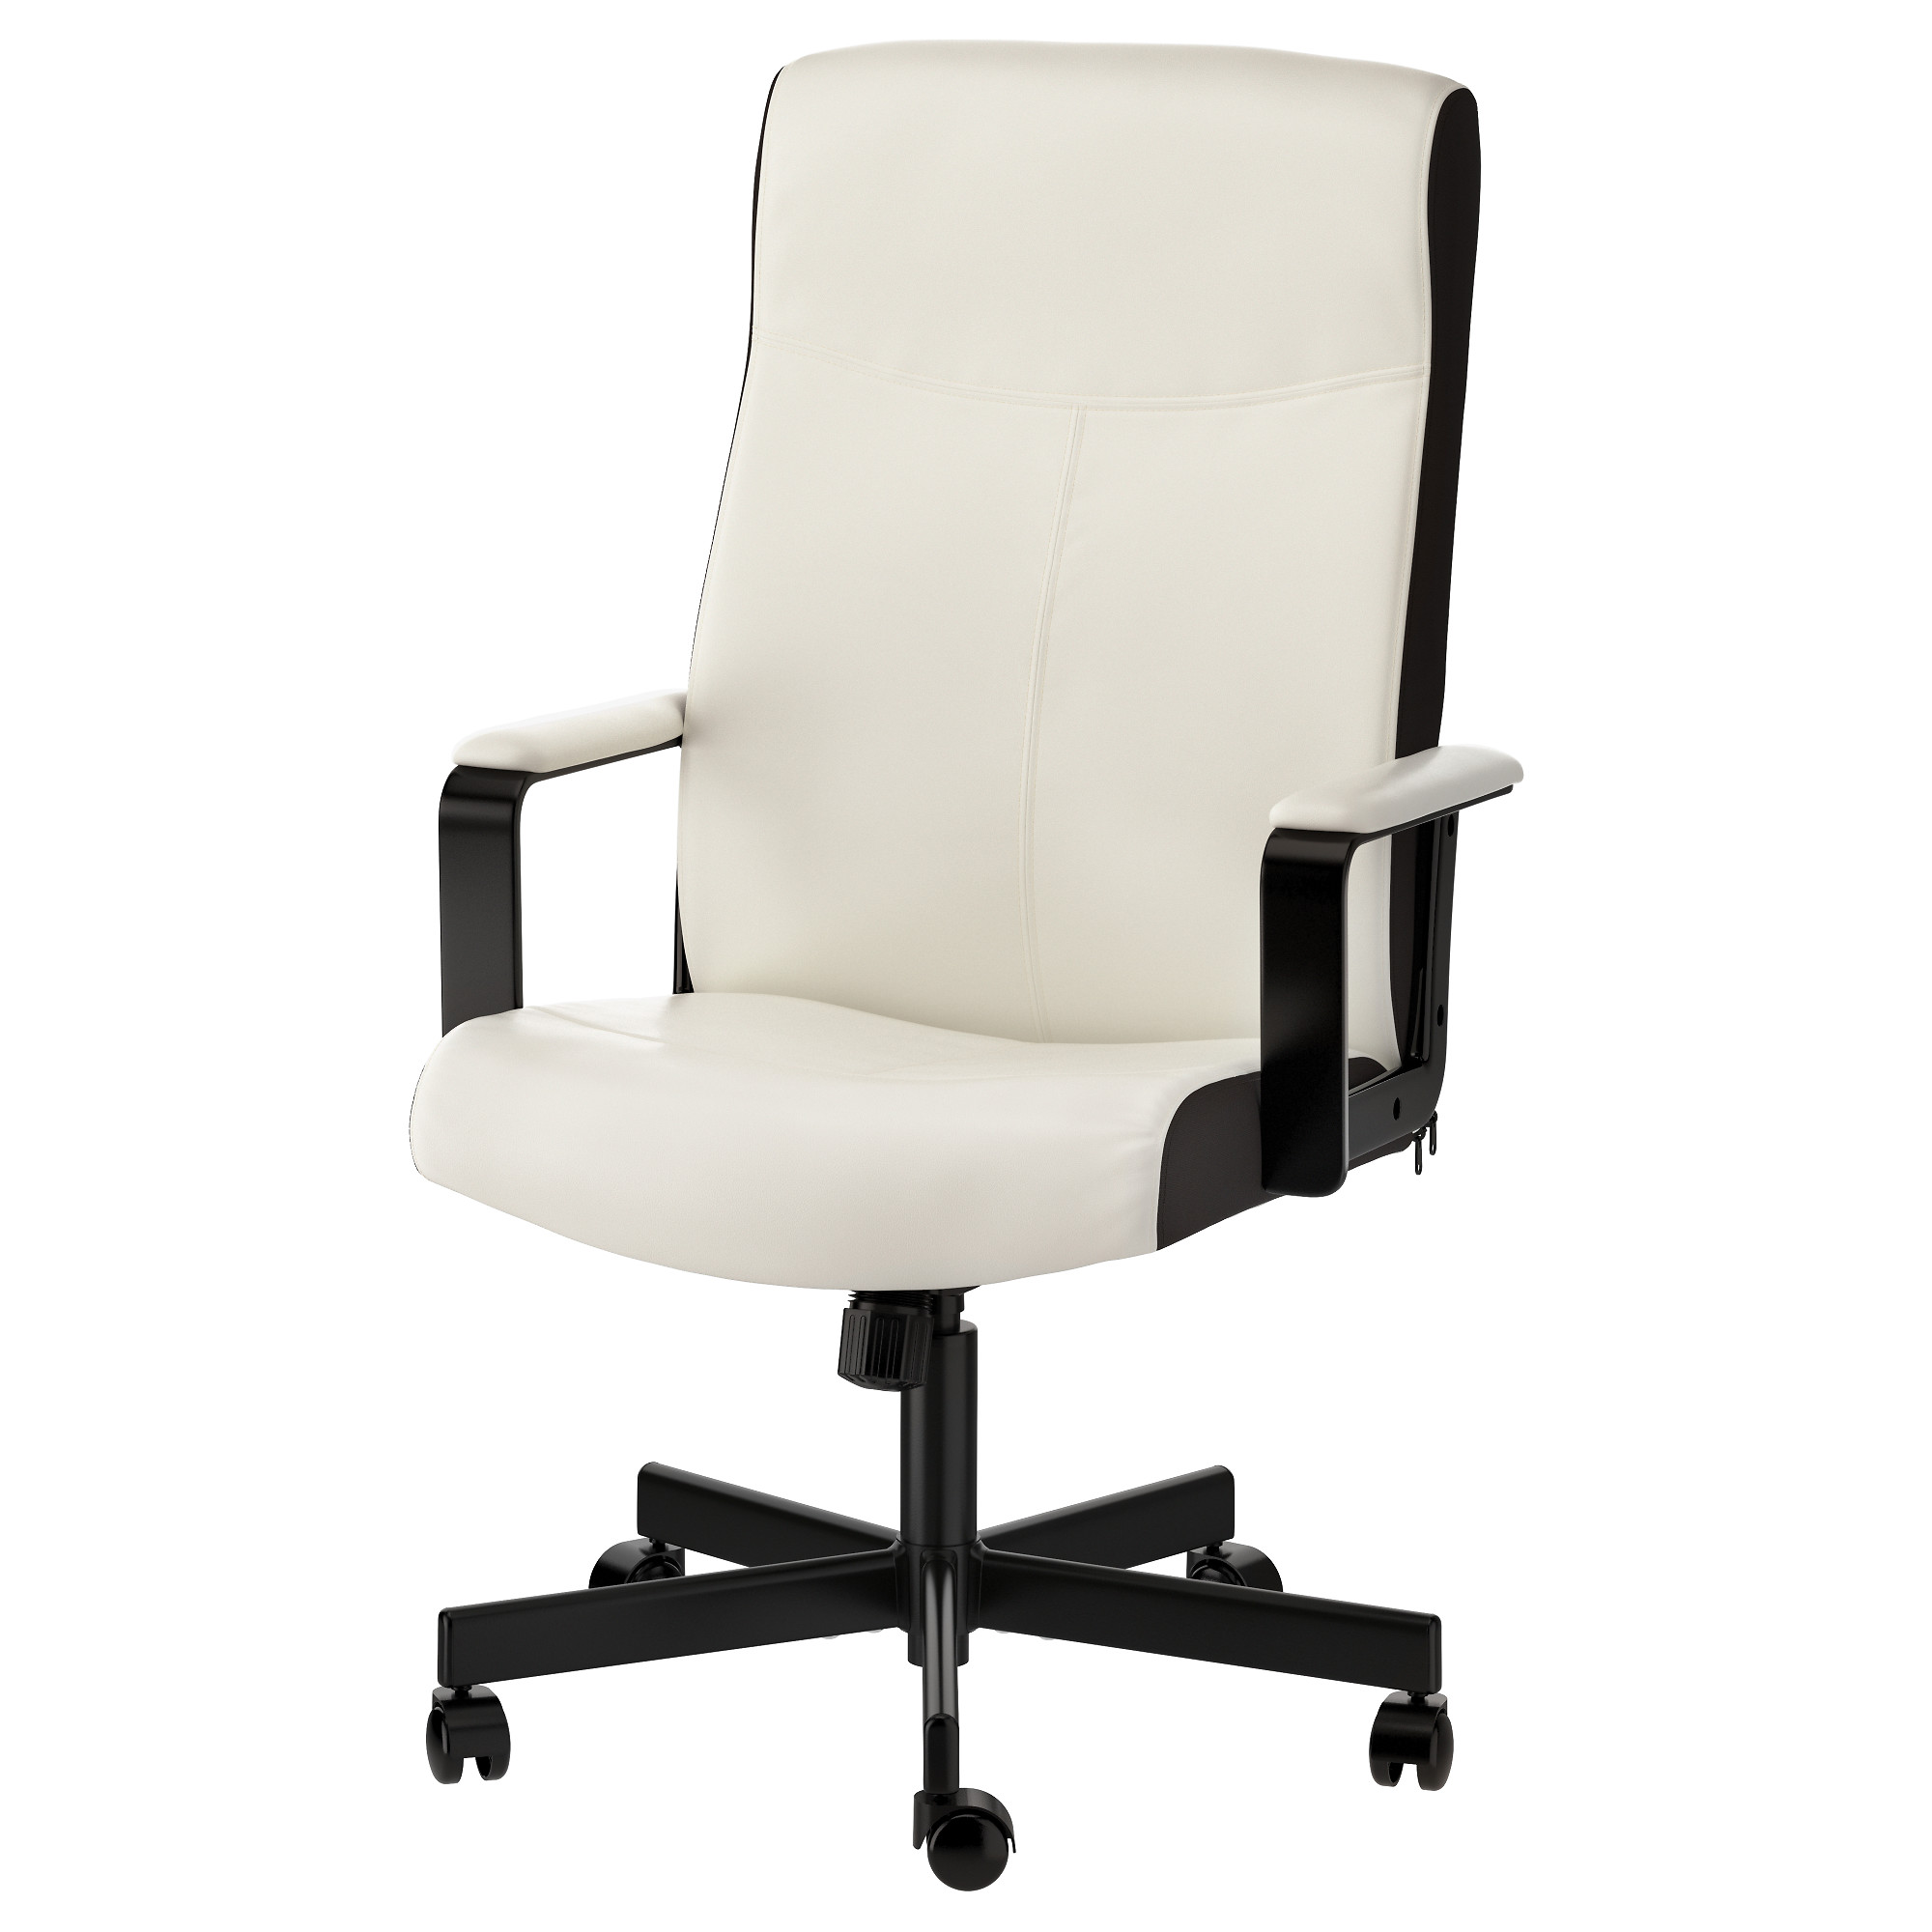 00339416 Millberget Office Chairs IKEA khmer in phnom penh cambodia